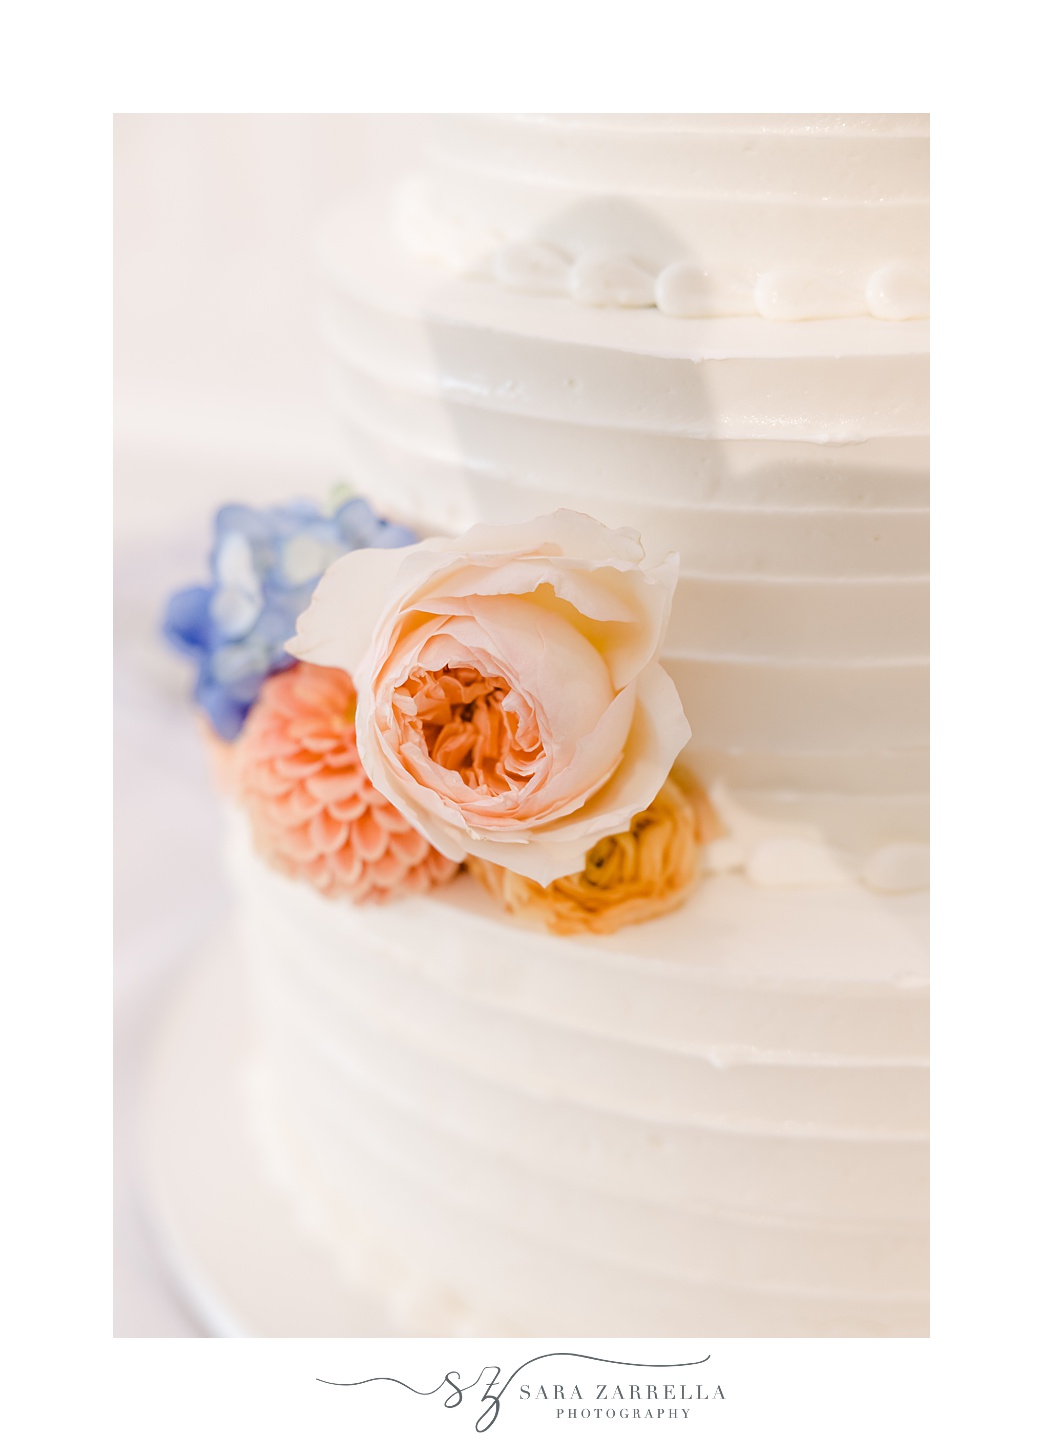 tiered wedding cake with peach rose accents 